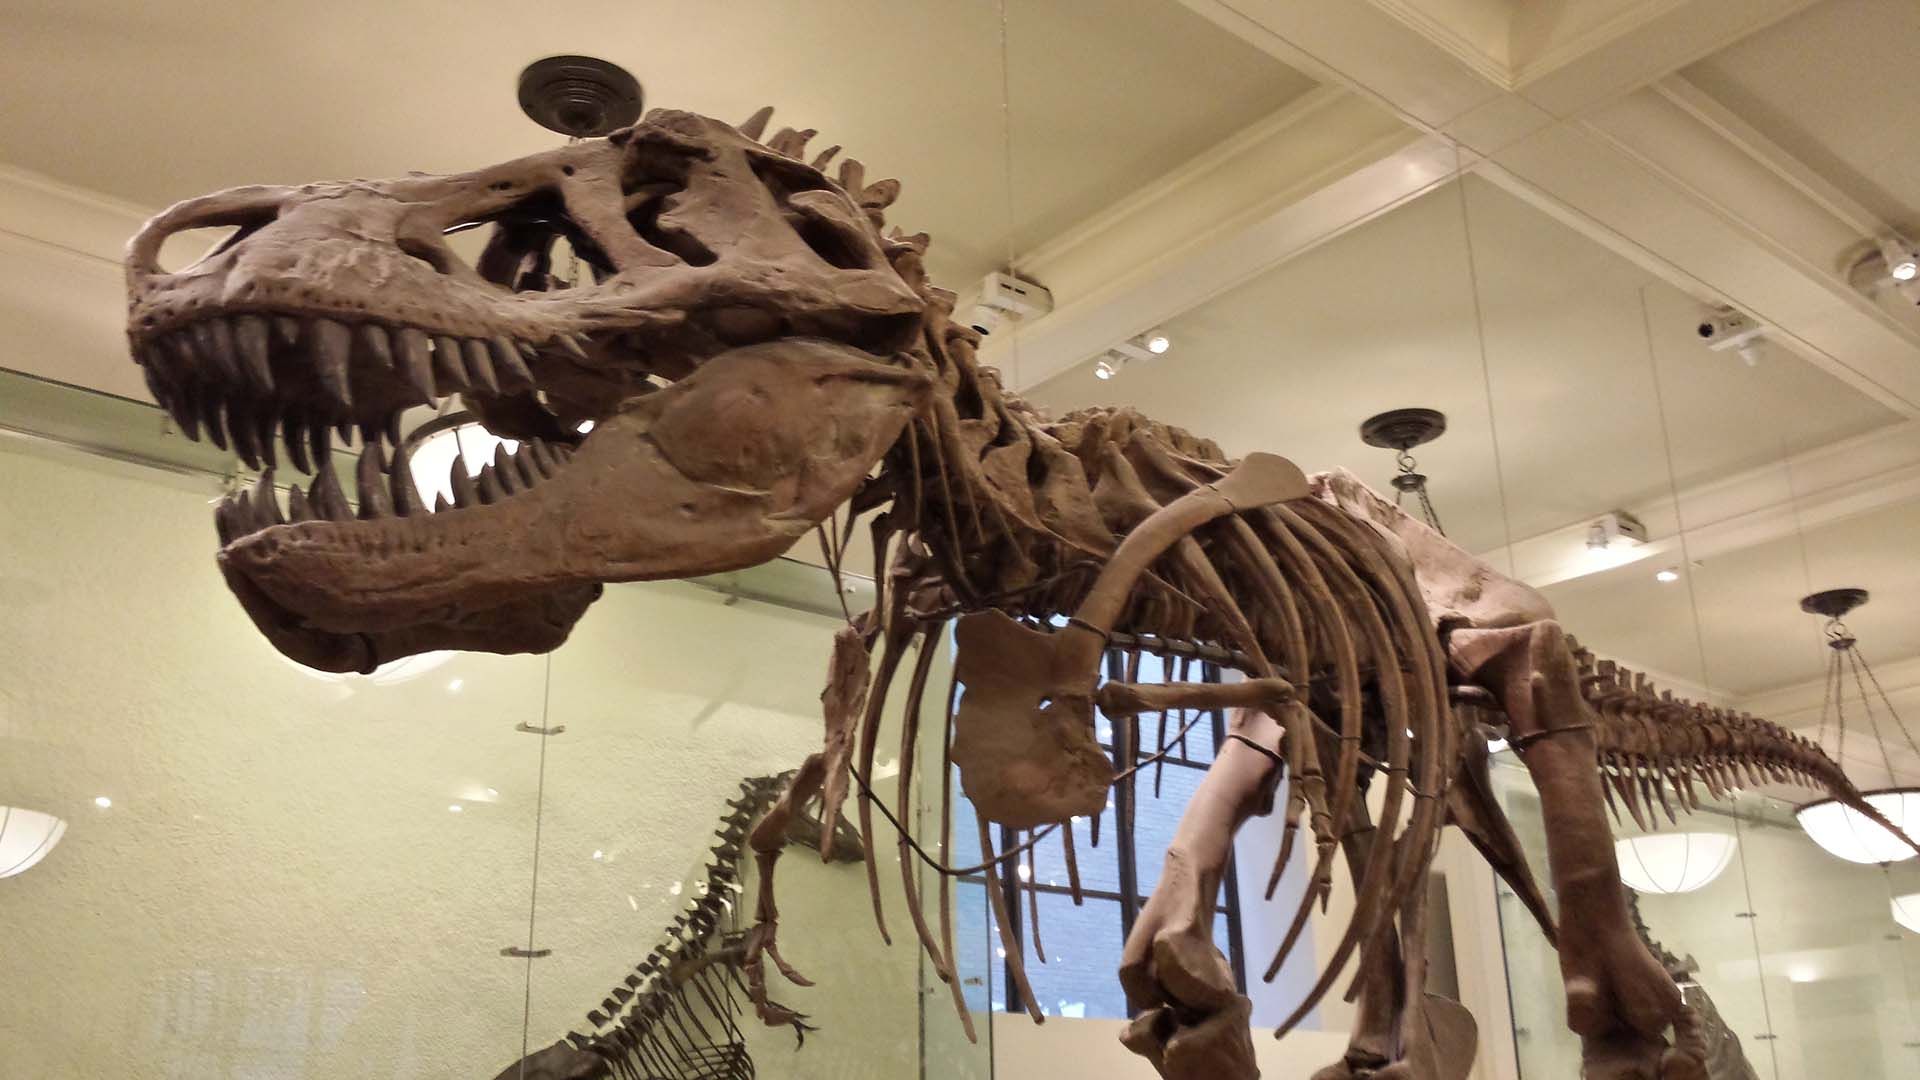 The skeleton of a Tyrannosarus Rex at the Museum of Natural History in New York City